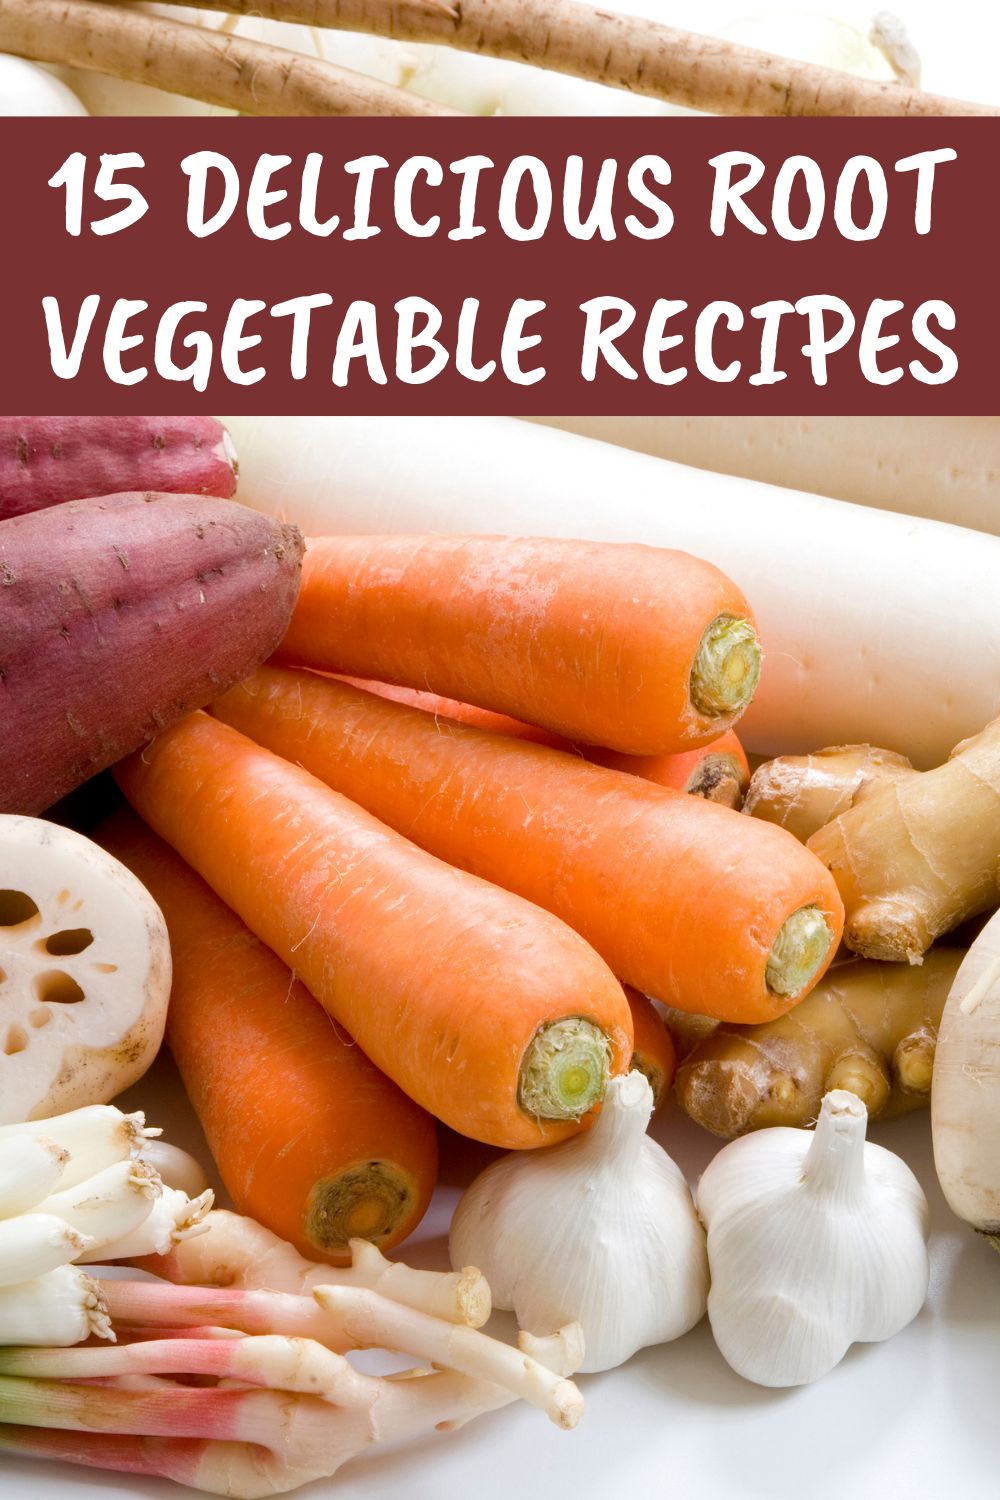 15 delicious root vegetable recipes.